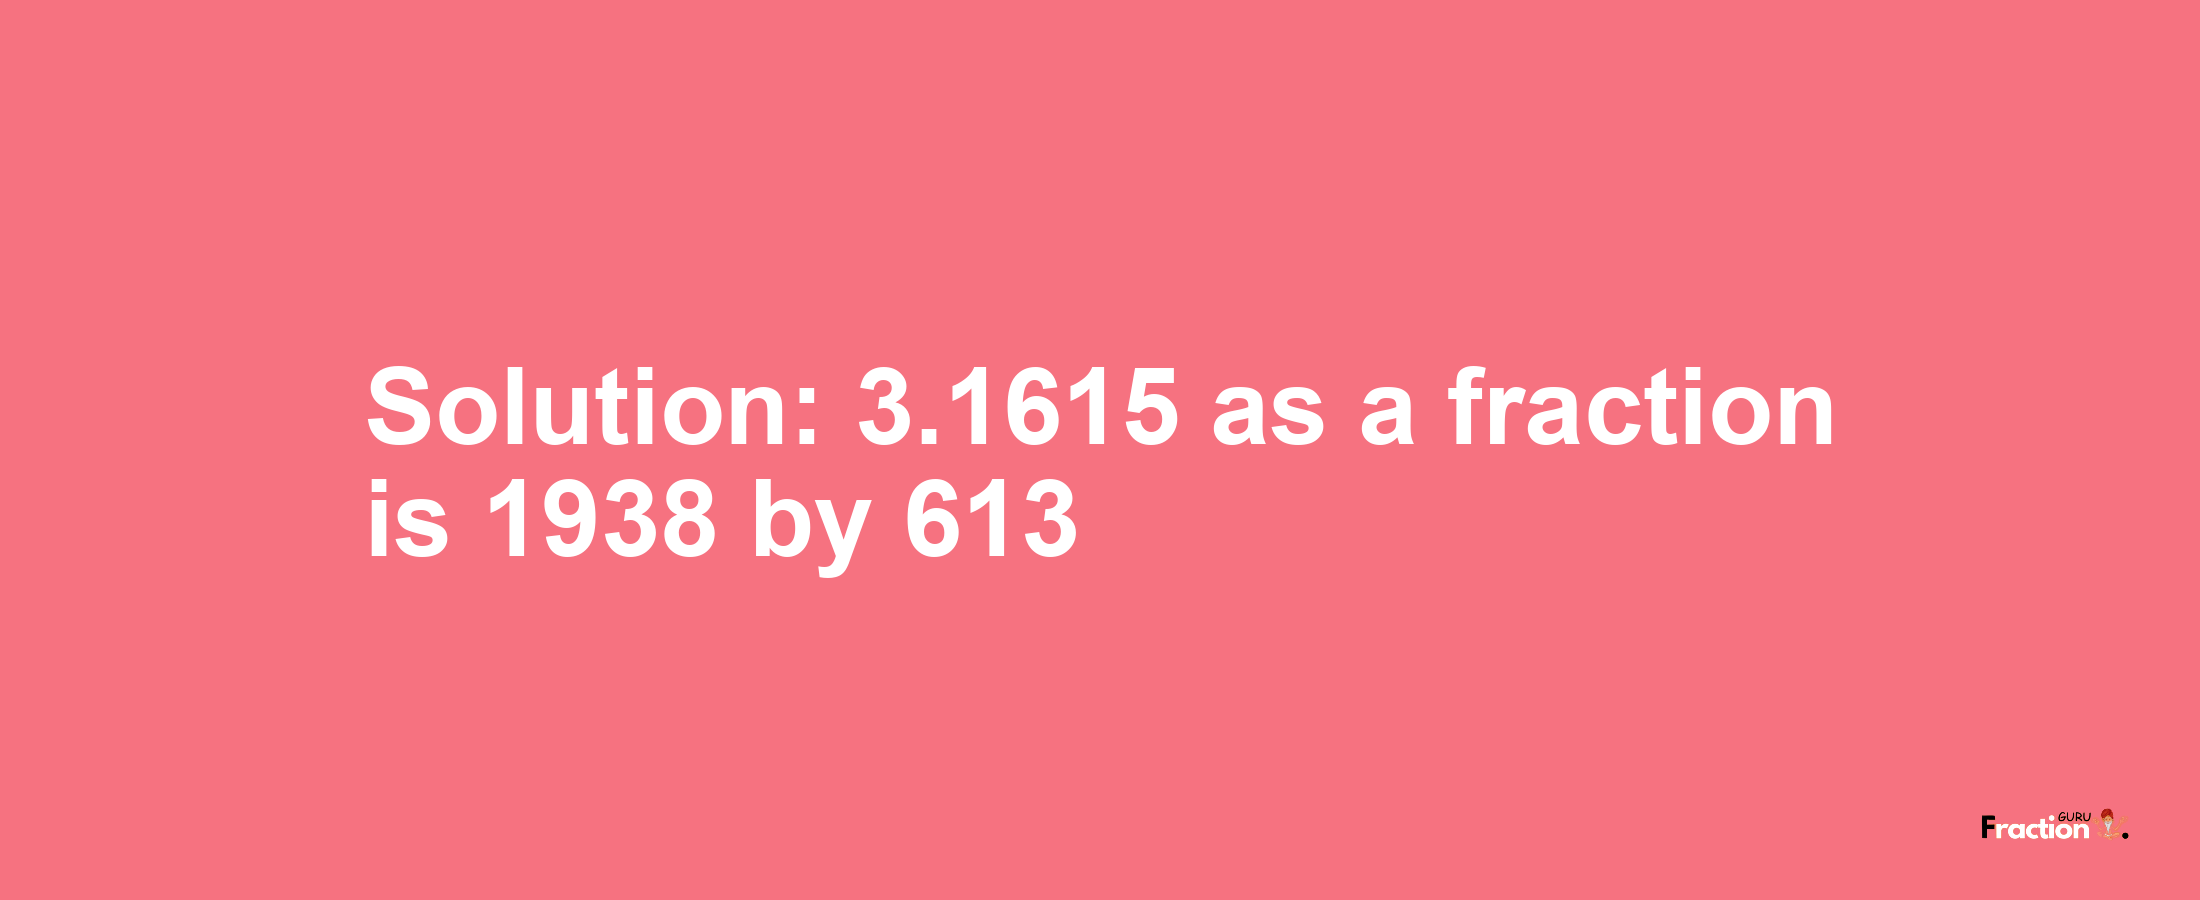 Solution:3.1615 as a fraction is 1938/613